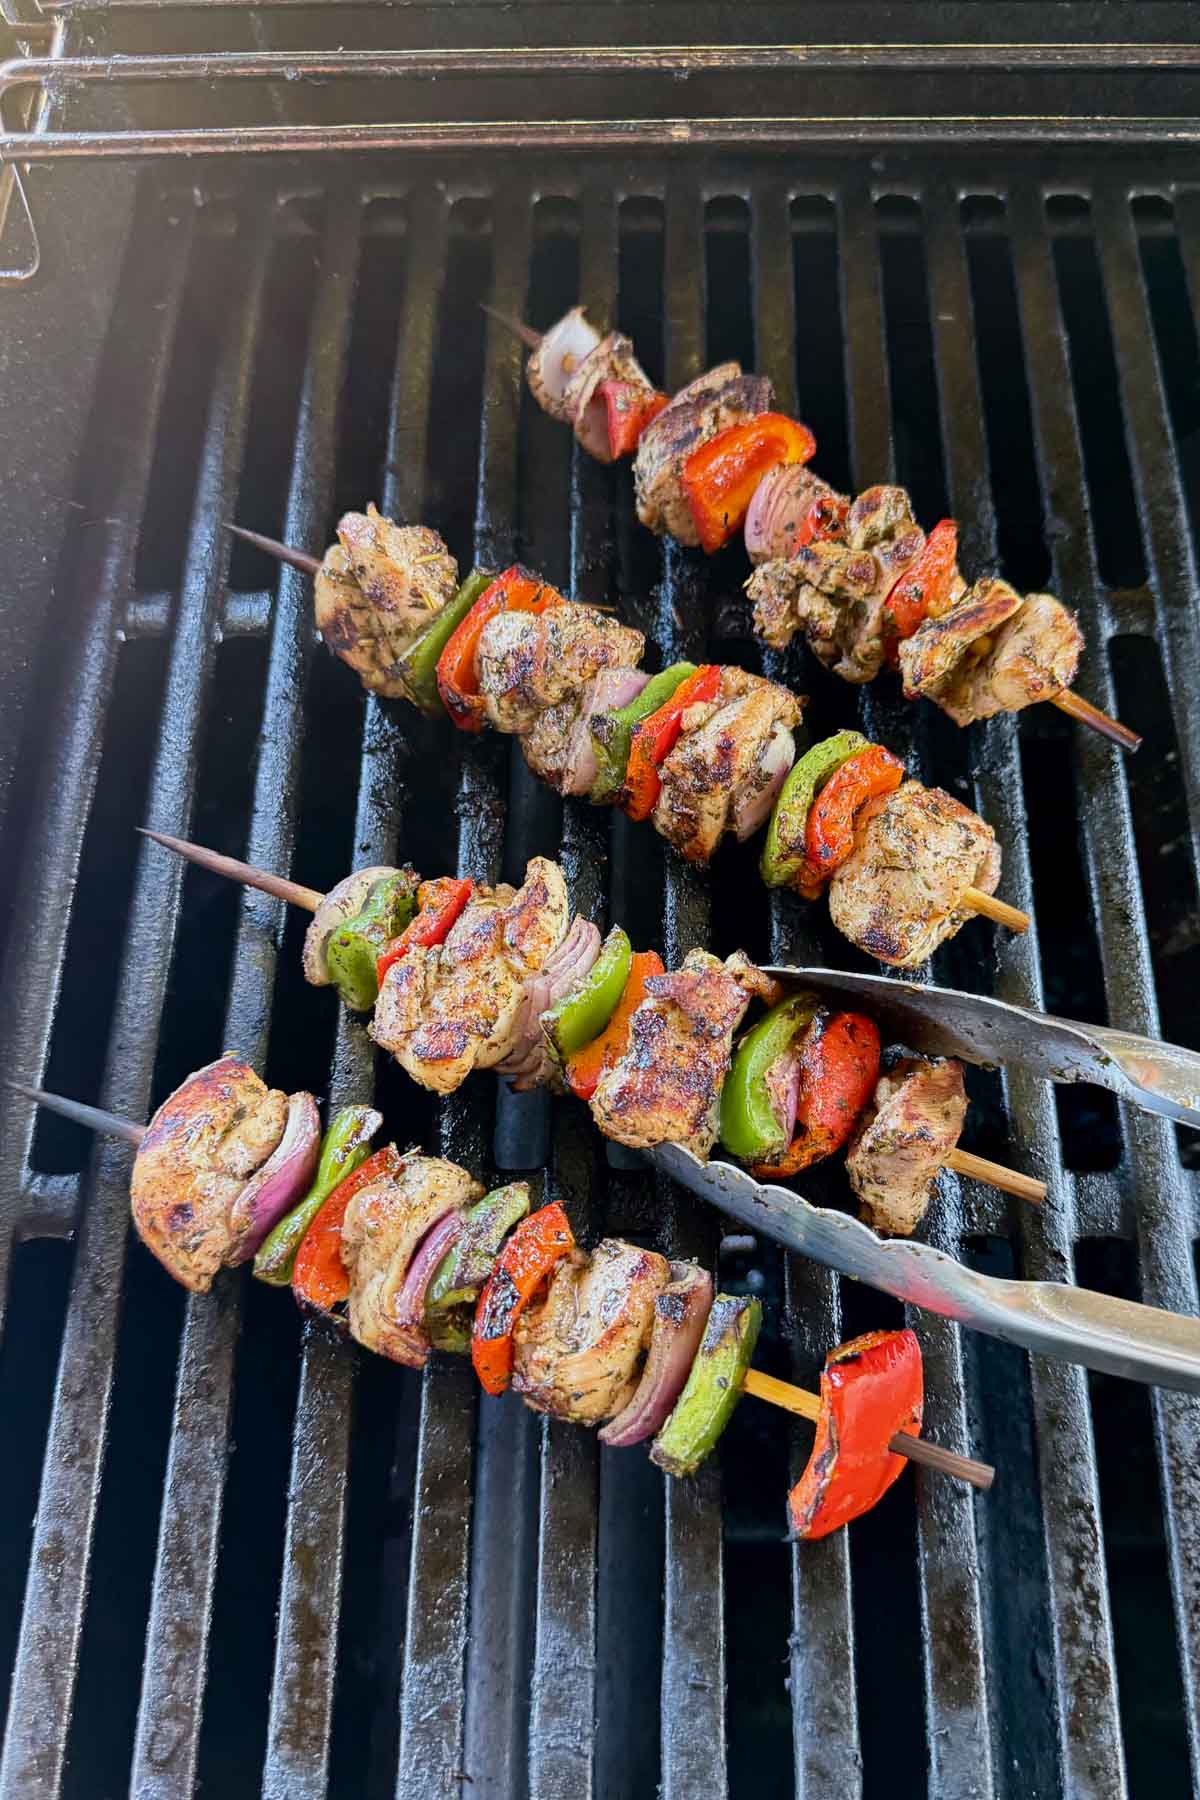 Greek Chicken Kabobs being cooked on a propane grill.